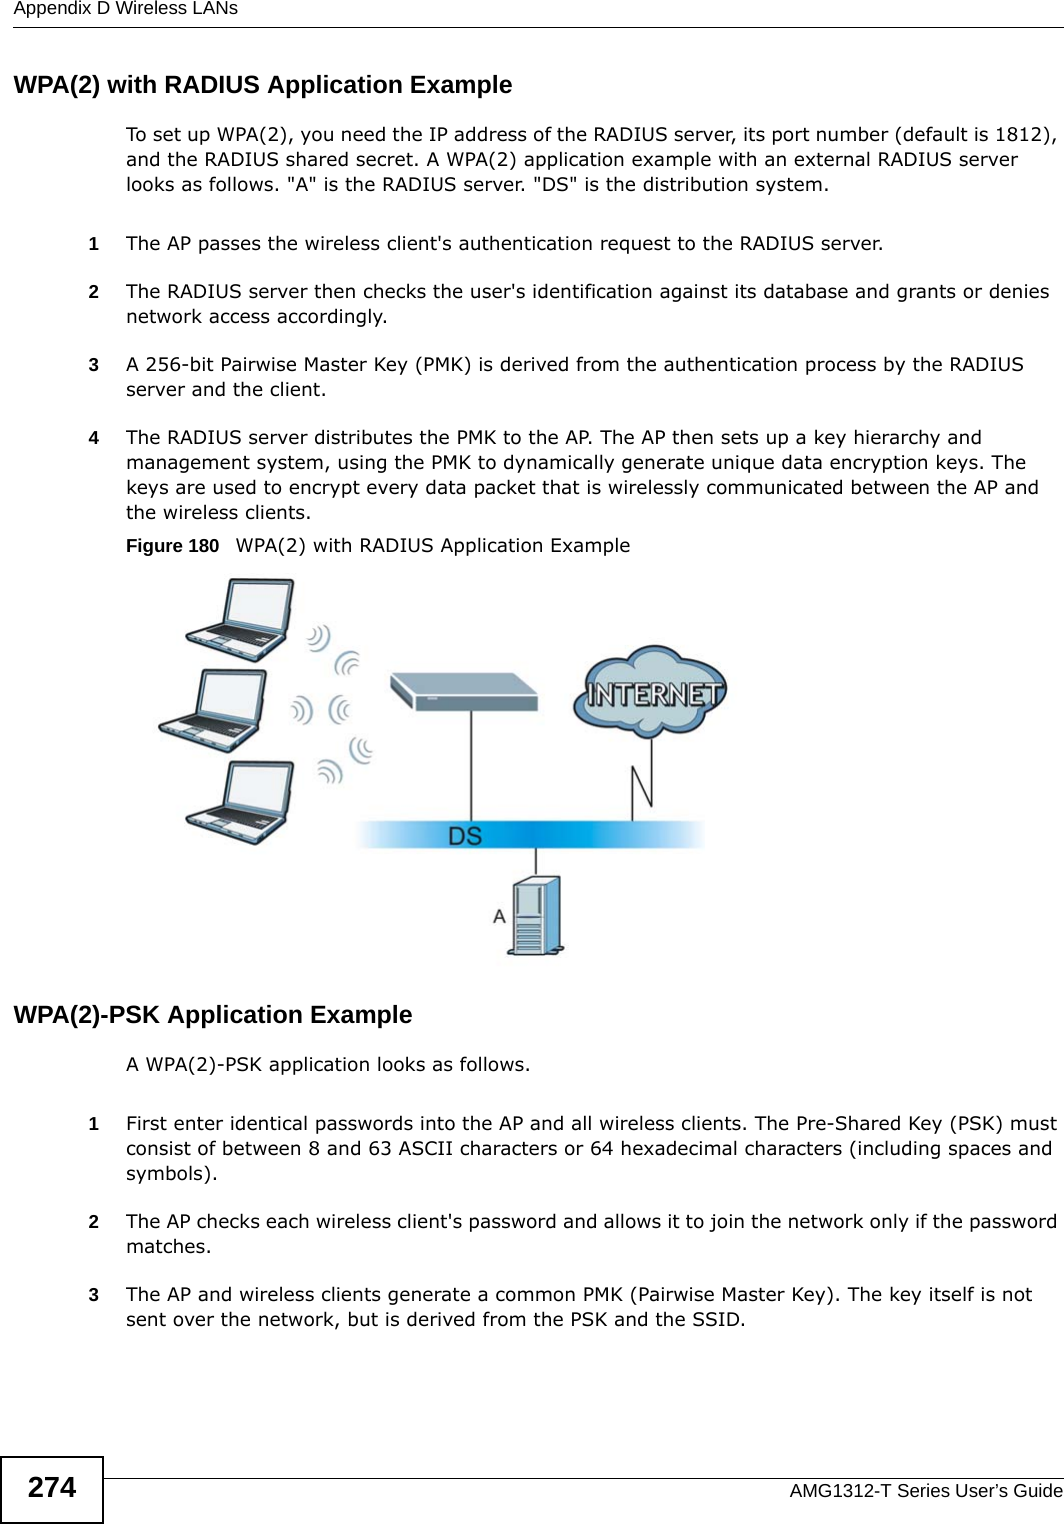 Appendix D Wireless LANsAMG1312-T Series User’s Guide274WPA(2) with RADIUS Application ExampleTo set up WPA(2), you need the IP address of the RADIUS server, its port number (default is 1812), and the RADIUS shared secret. A WPA(2) application example with an external RADIUS server looks as follows. &quot;A&quot; is the RADIUS server. &quot;DS&quot; is the distribution system.1The AP passes the wireless client&apos;s authentication request to the RADIUS server.2The RADIUS server then checks the user&apos;s identification against its database and grants or denies network access accordingly.3A 256-bit Pairwise Master Key (PMK) is derived from the authentication process by the RADIUS server and the client.4The RADIUS server distributes the PMK to the AP. The AP then sets up a key hierarchy and management system, using the PMK to dynamically generate unique data encryption keys. The keys are used to encrypt every data packet that is wirelessly communicated between the AP and the wireless clients.Figure 180   WPA(2) with RADIUS Application ExampleWPA(2)-PSK Application ExampleA WPA(2)-PSK application looks as follows.1First enter identical passwords into the AP and all wireless clients. The Pre-Shared Key (PSK) must consist of between 8 and 63 ASCII characters or 64 hexadecimal characters (including spaces and symbols).2The AP checks each wireless client&apos;s password and allows it to join the network only if the password matches.3The AP and wireless clients generate a common PMK (Pairwise Master Key). The key itself is not sent over the network, but is derived from the PSK and the SSID. 